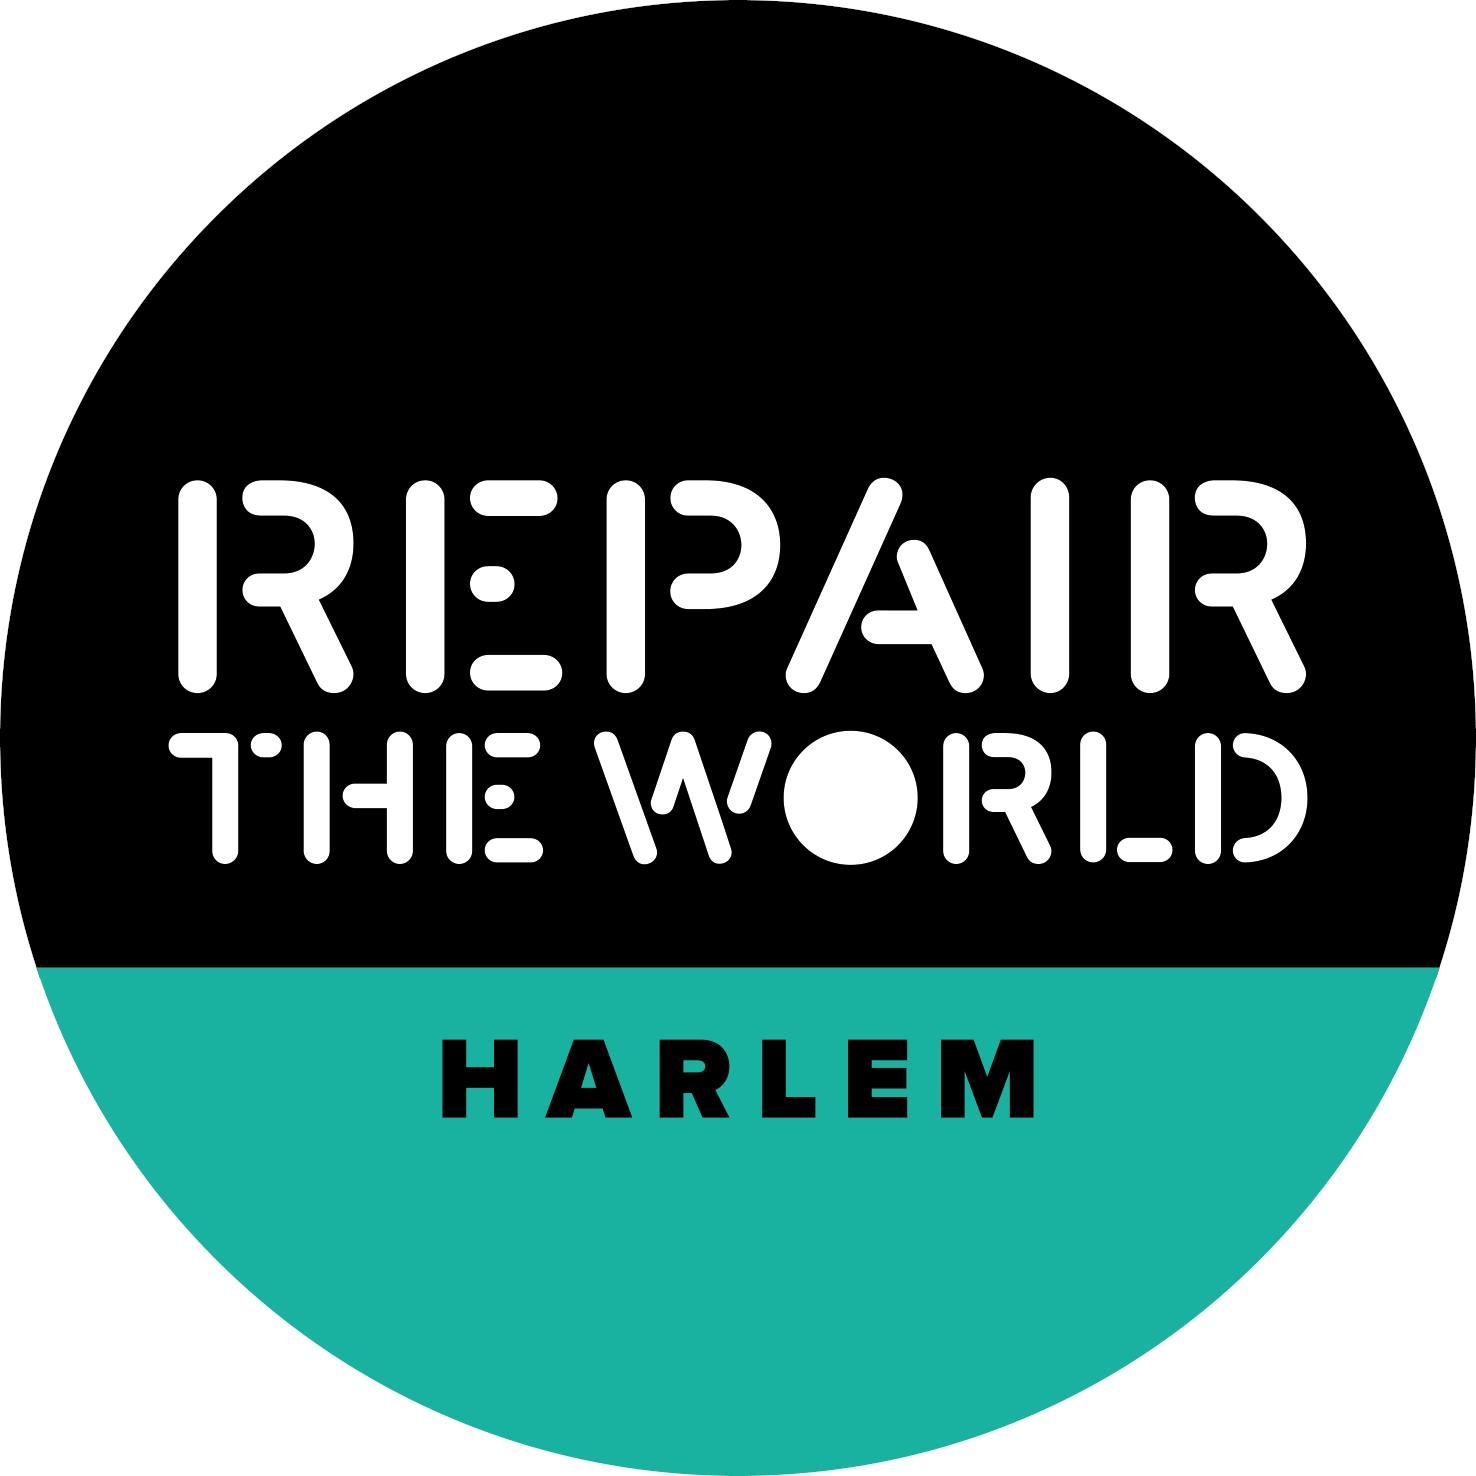 @RepairTheWorld mobilizes Jews and their communities to take action to pursue a just world. What will you repair in #Harlem? #Volunteer